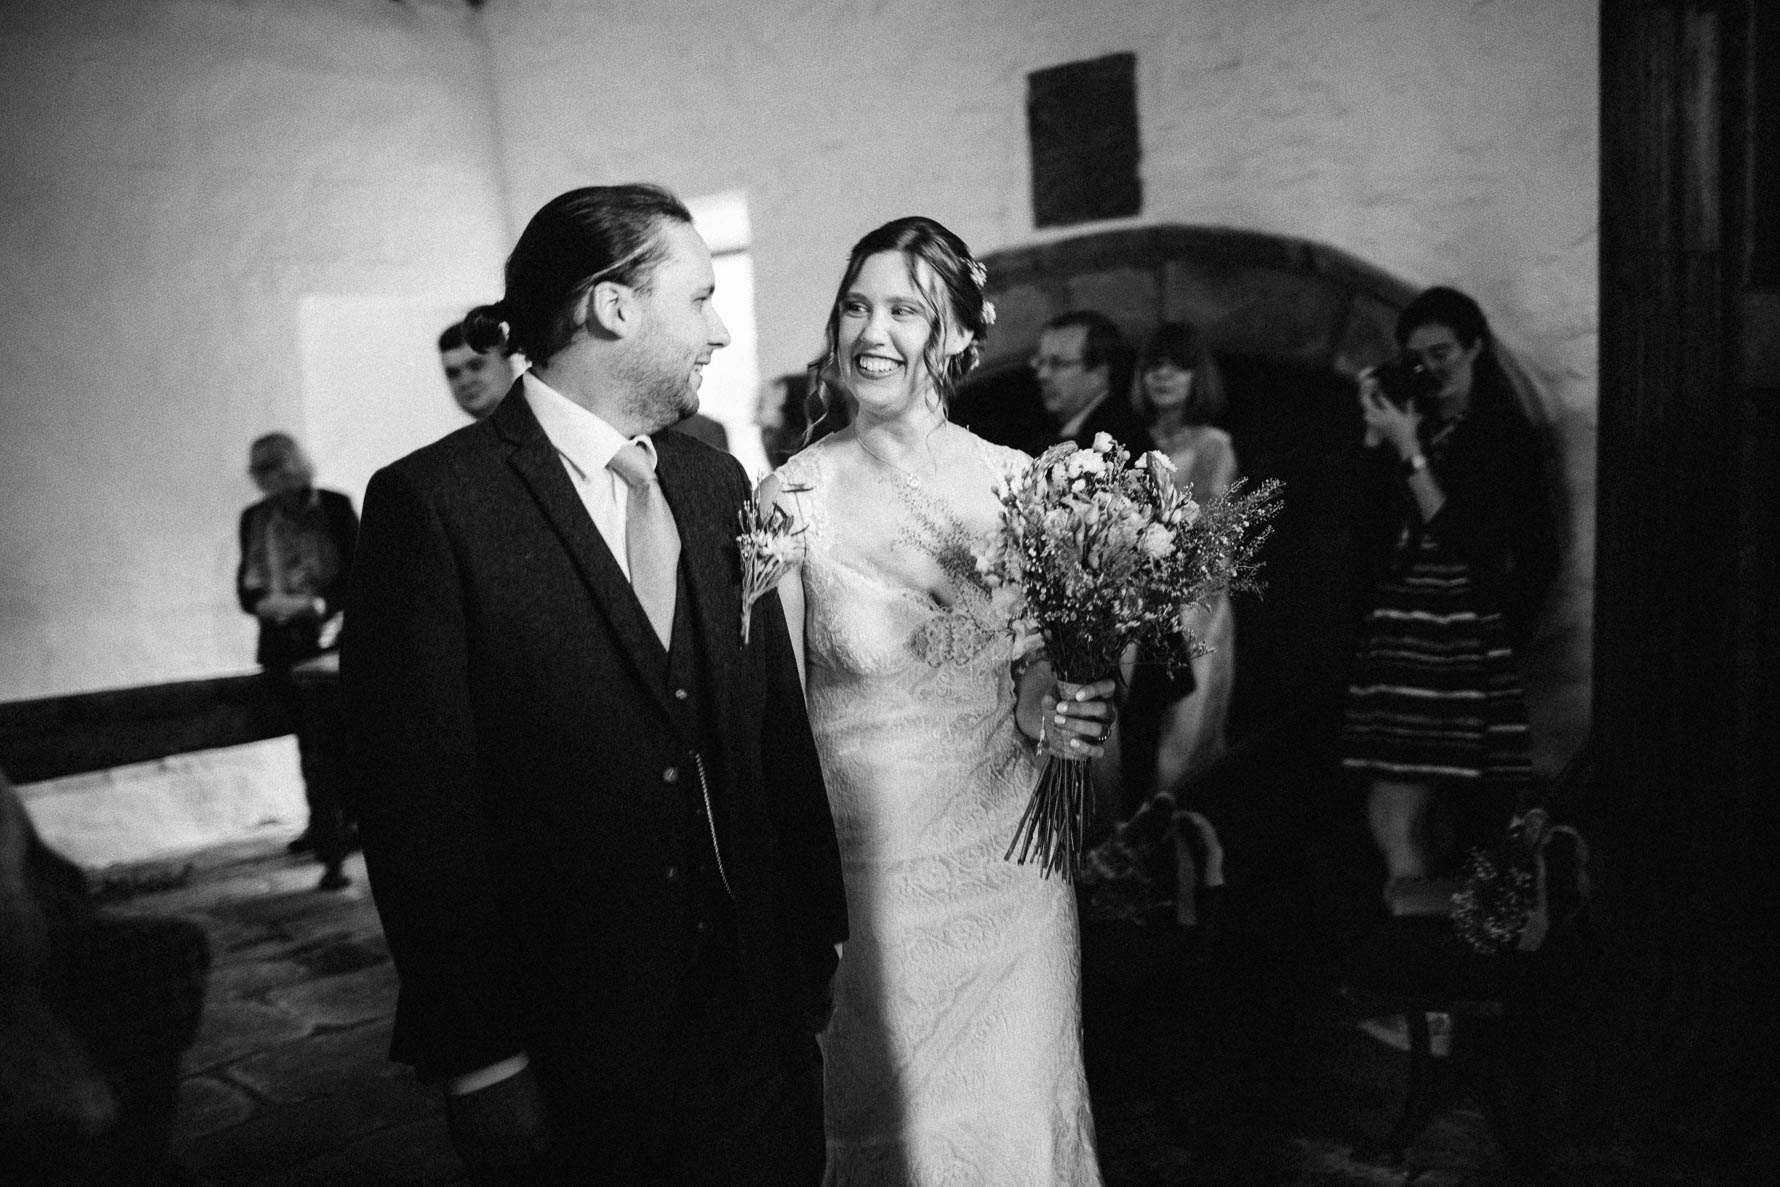 Black and white shot of of the bride and groom smiling at each other as they walk down the aisle after their wedding ceremony